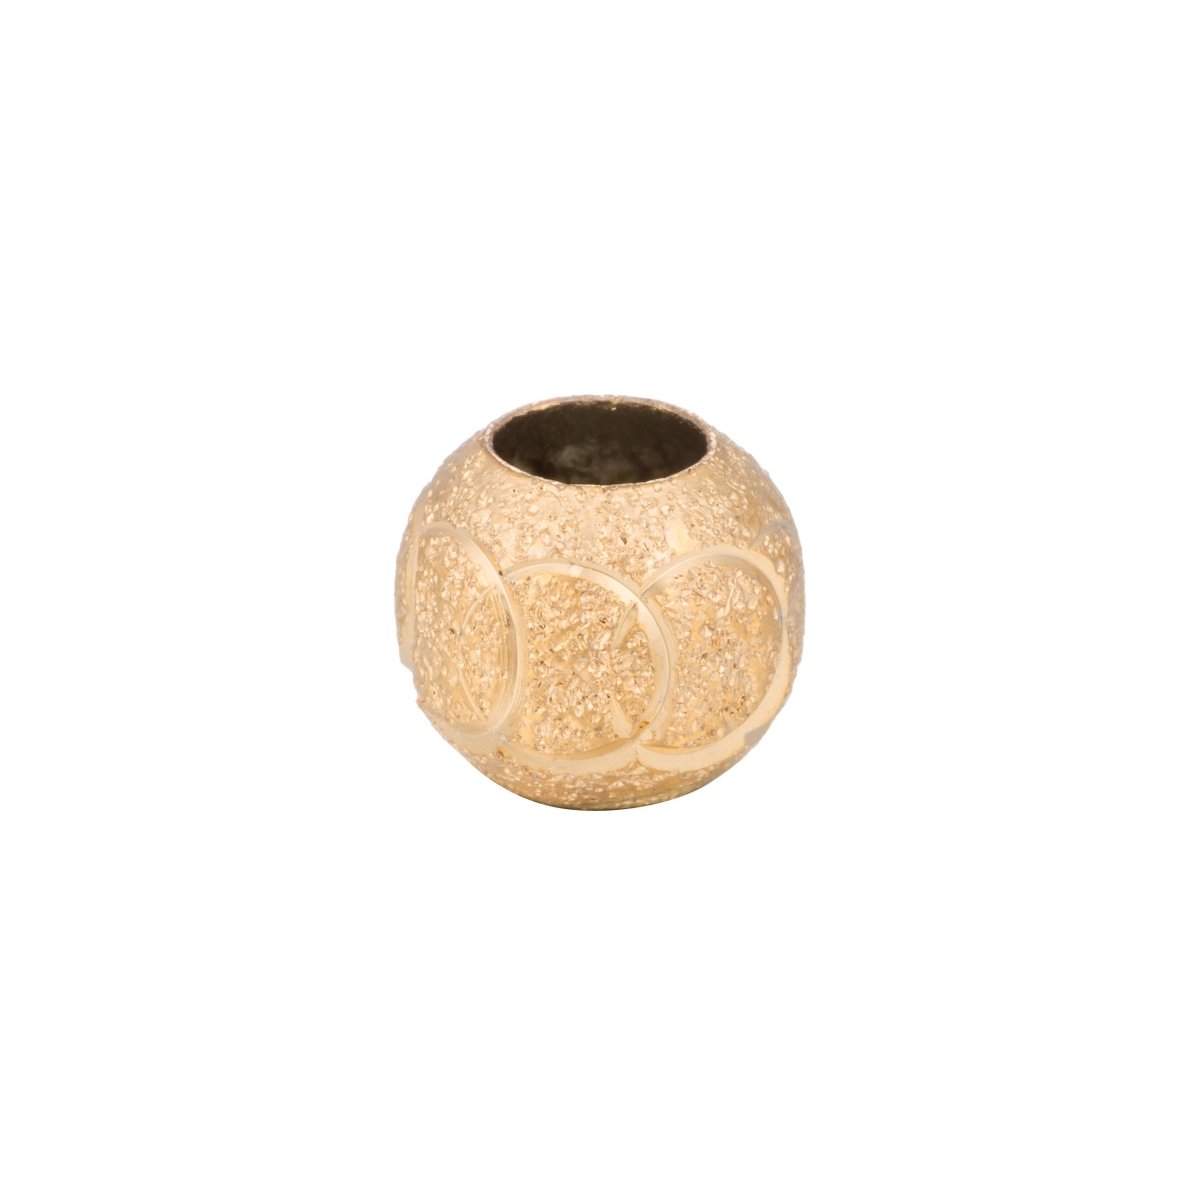 1pc Large Hole Beads Gold Filled Spacer, Circle, Round, Rustic Bracelet Charm Bead Finding Connector Pendant For Jewelry Making B-126 - DLUXCA